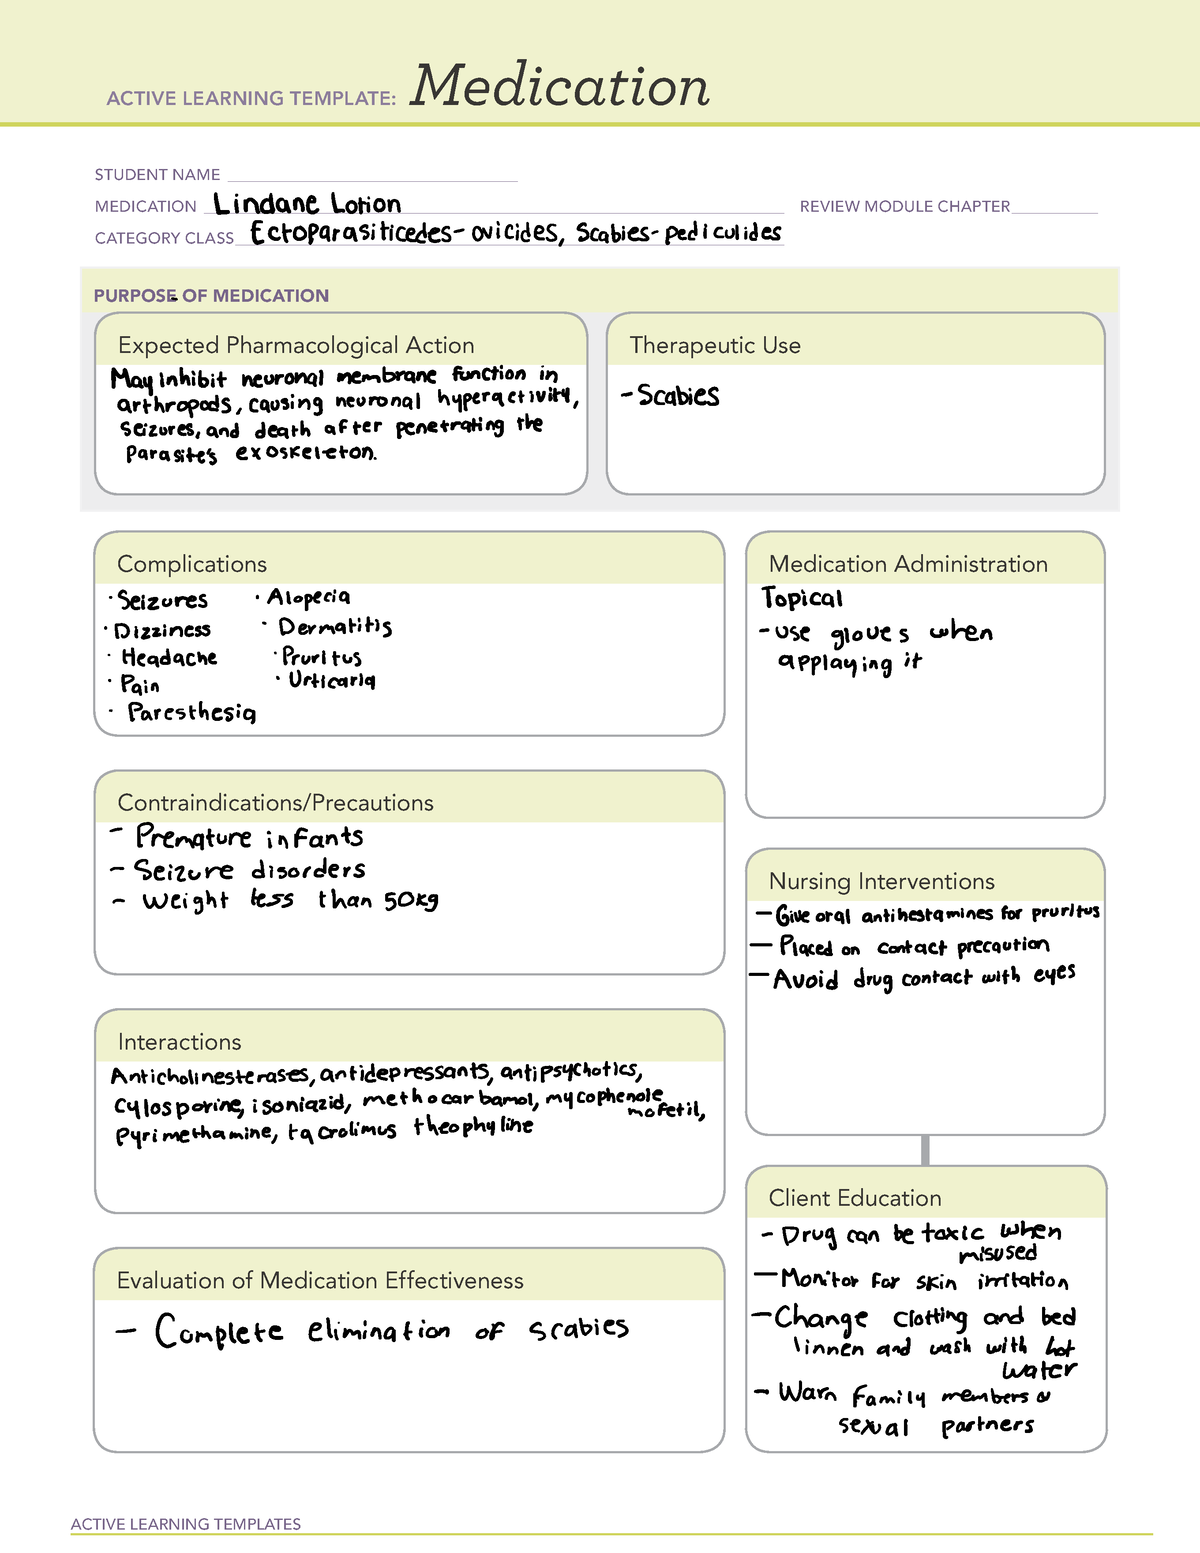 ati-medication-template-lindane-solution-active-learning-templates